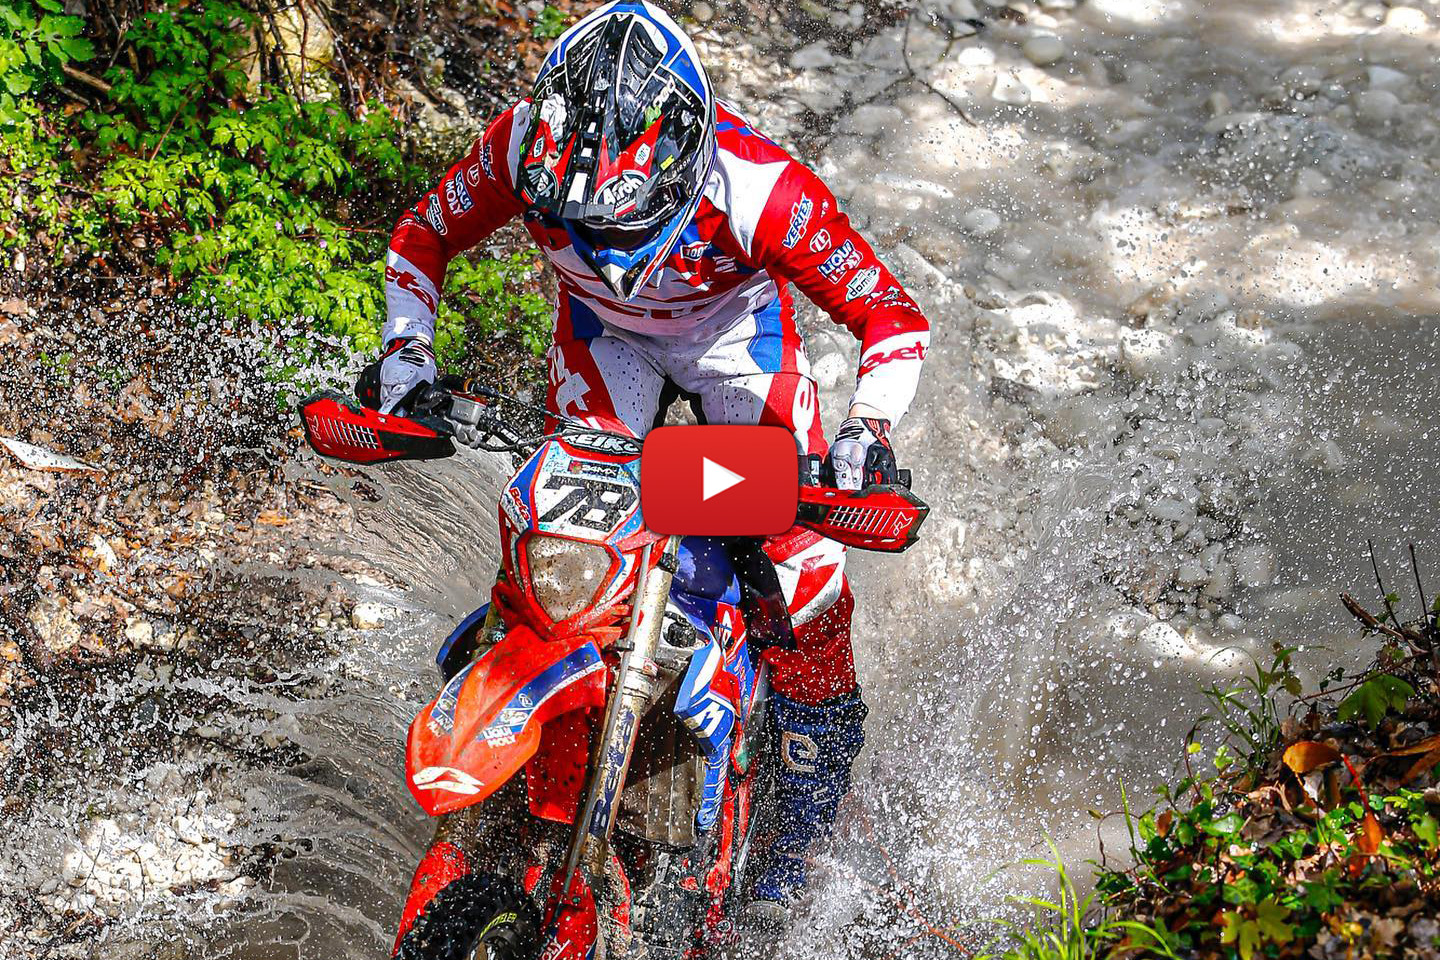 Italian Enduro Rnd 5 video highlights – Holcombe by a whisker